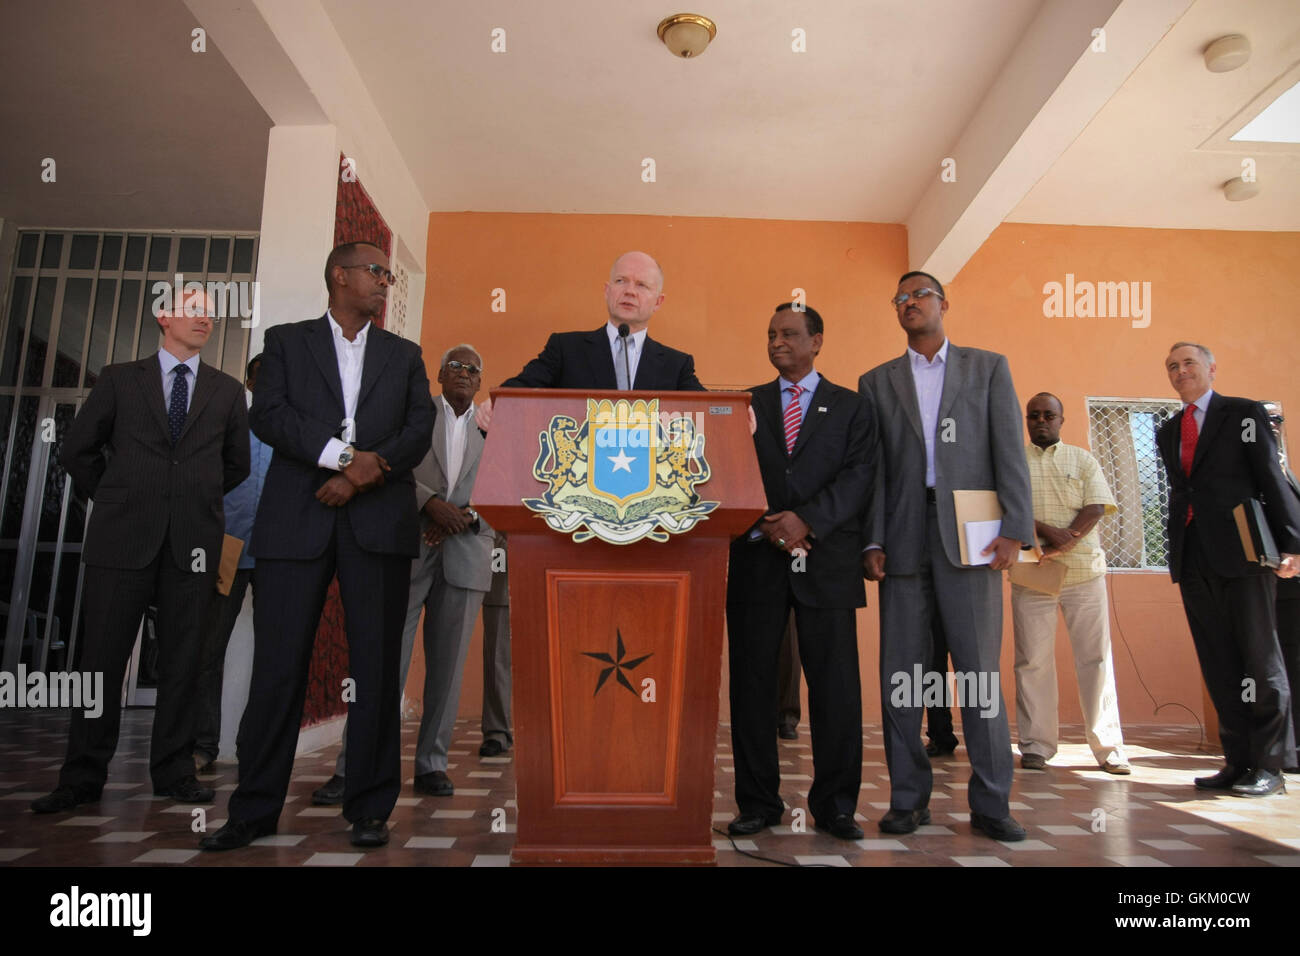 SOMALIA, Mogadishu: In a photograph released by the African Union-United Nations Information Support Team 2 February, British Foreign Secretary William Hague speaks during a press conference with at Villa Somalia, the seat of the Transitional Federal Government and the Presidential Palace. Hague was today the first British Foreign Secretary to set foot in Somalia for over 20 years, where he met with the leadership of the African Union Mission in Somalia (AMISOM) and the president of the Somali Transitional Federal Government (TFG) Sheik Sharif Sheik Ahmed, and formally introducing the credenti Stock Photo